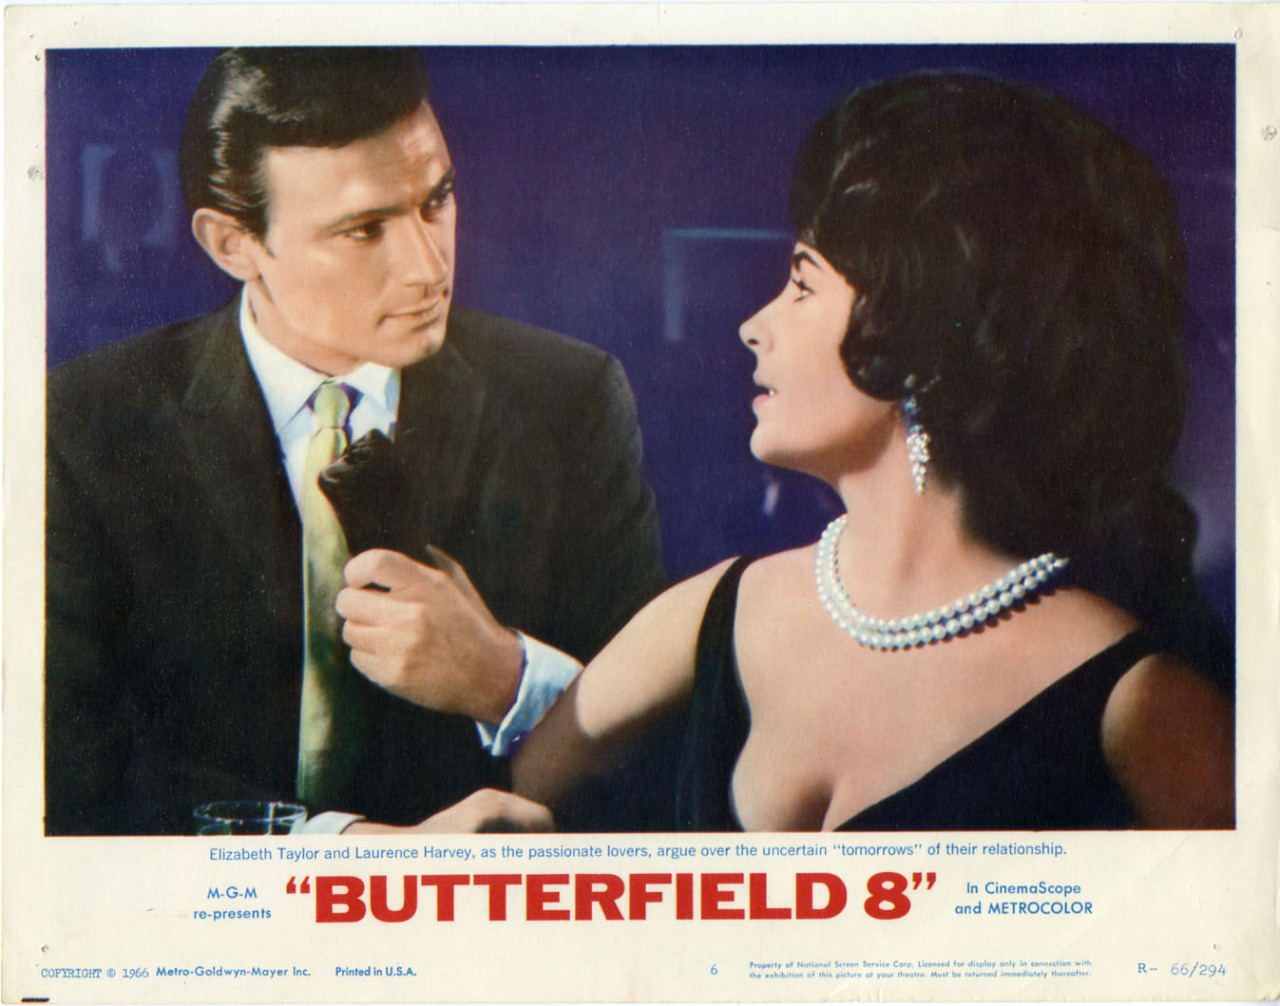 Is It Any Good? Butterfield 8